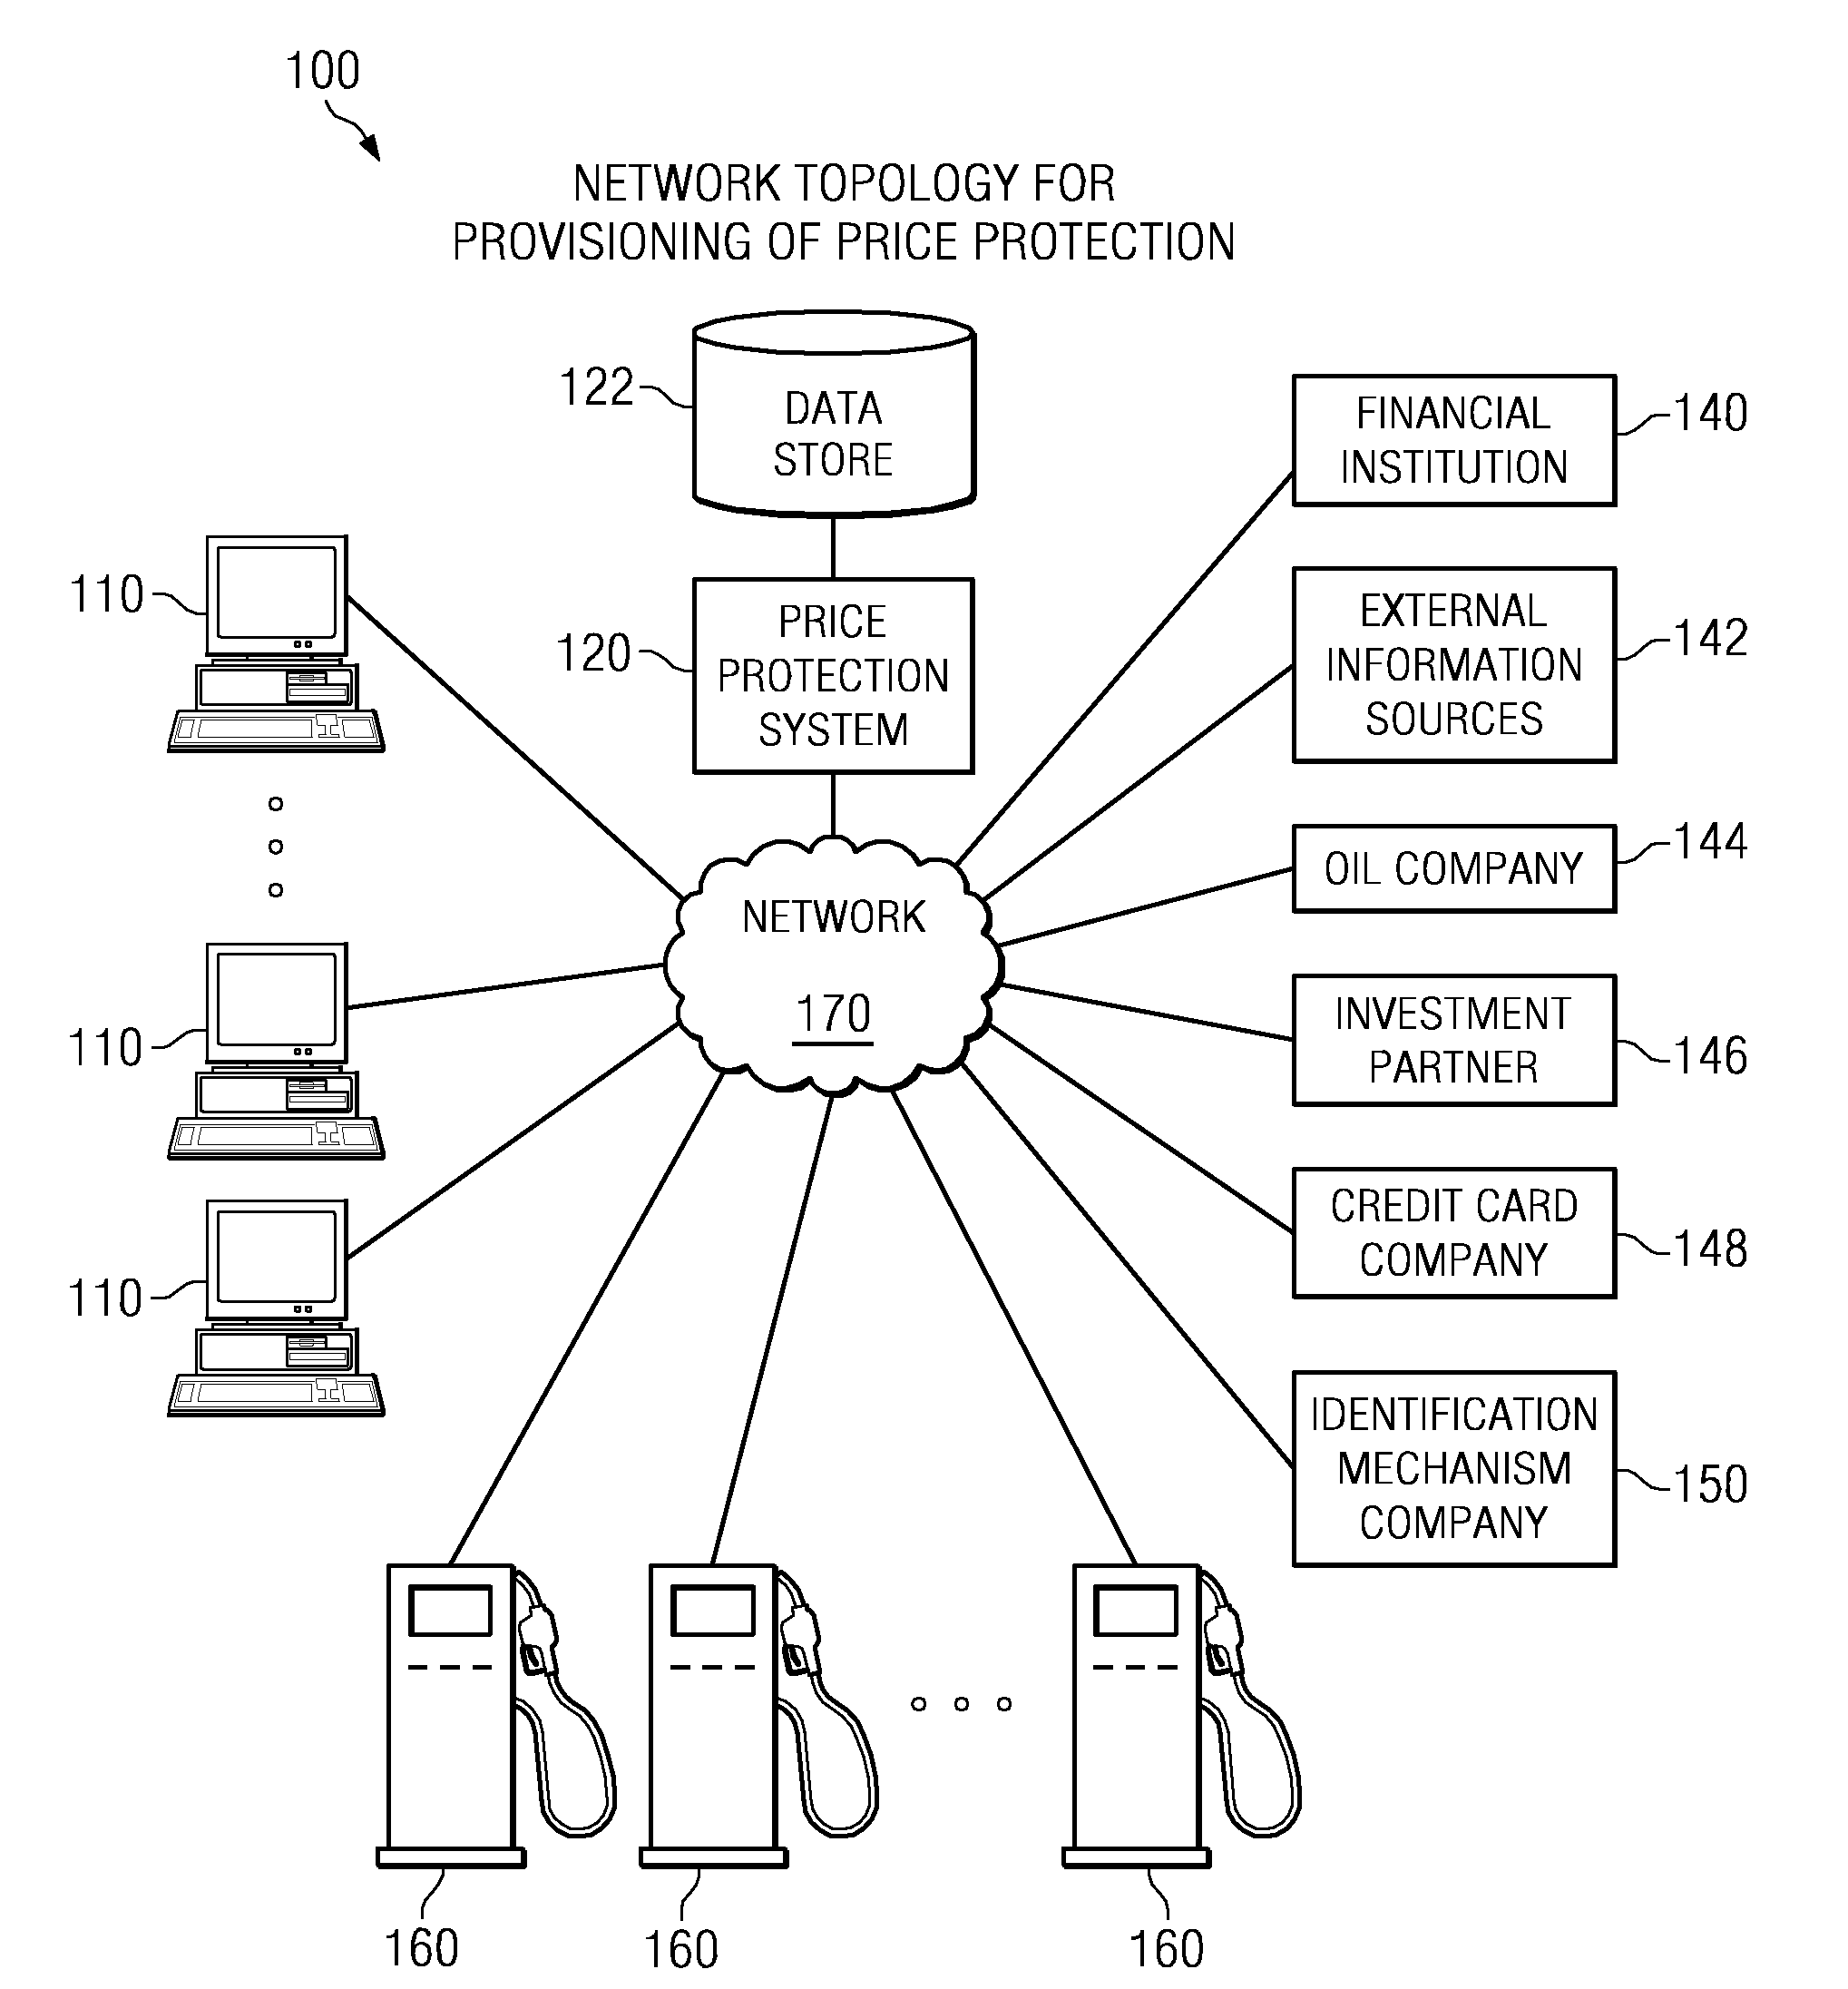 Method and system for providing price protection for commodity purchasing through price protection contracts